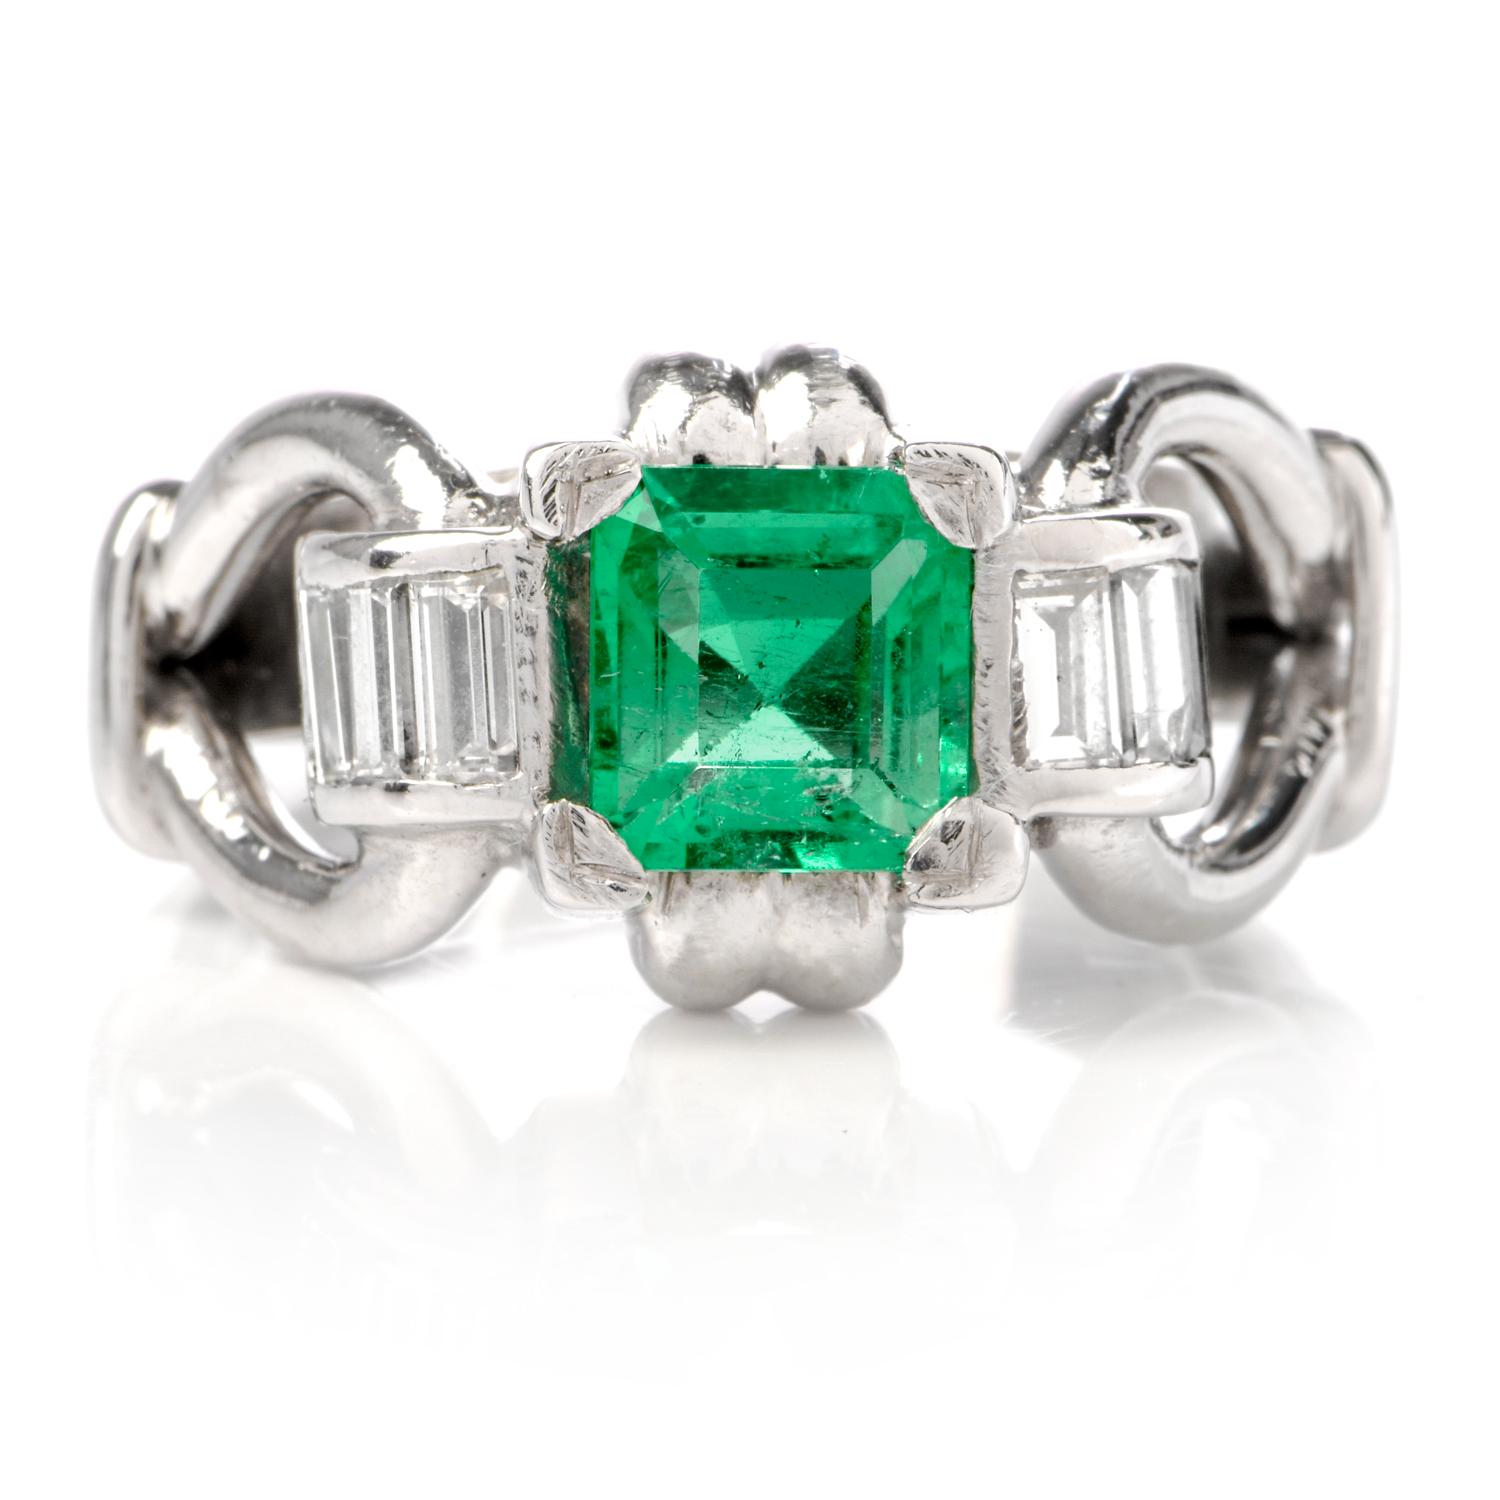 This vintage emerald and diamond ring is crafted in solid platinum, weighing approximately 12.2 carats and measuring 11mm x 6mm high. Displaying one centered prong-set Asscher cut vibrant Colombian emerald, weighing approximately 1.15 carats.